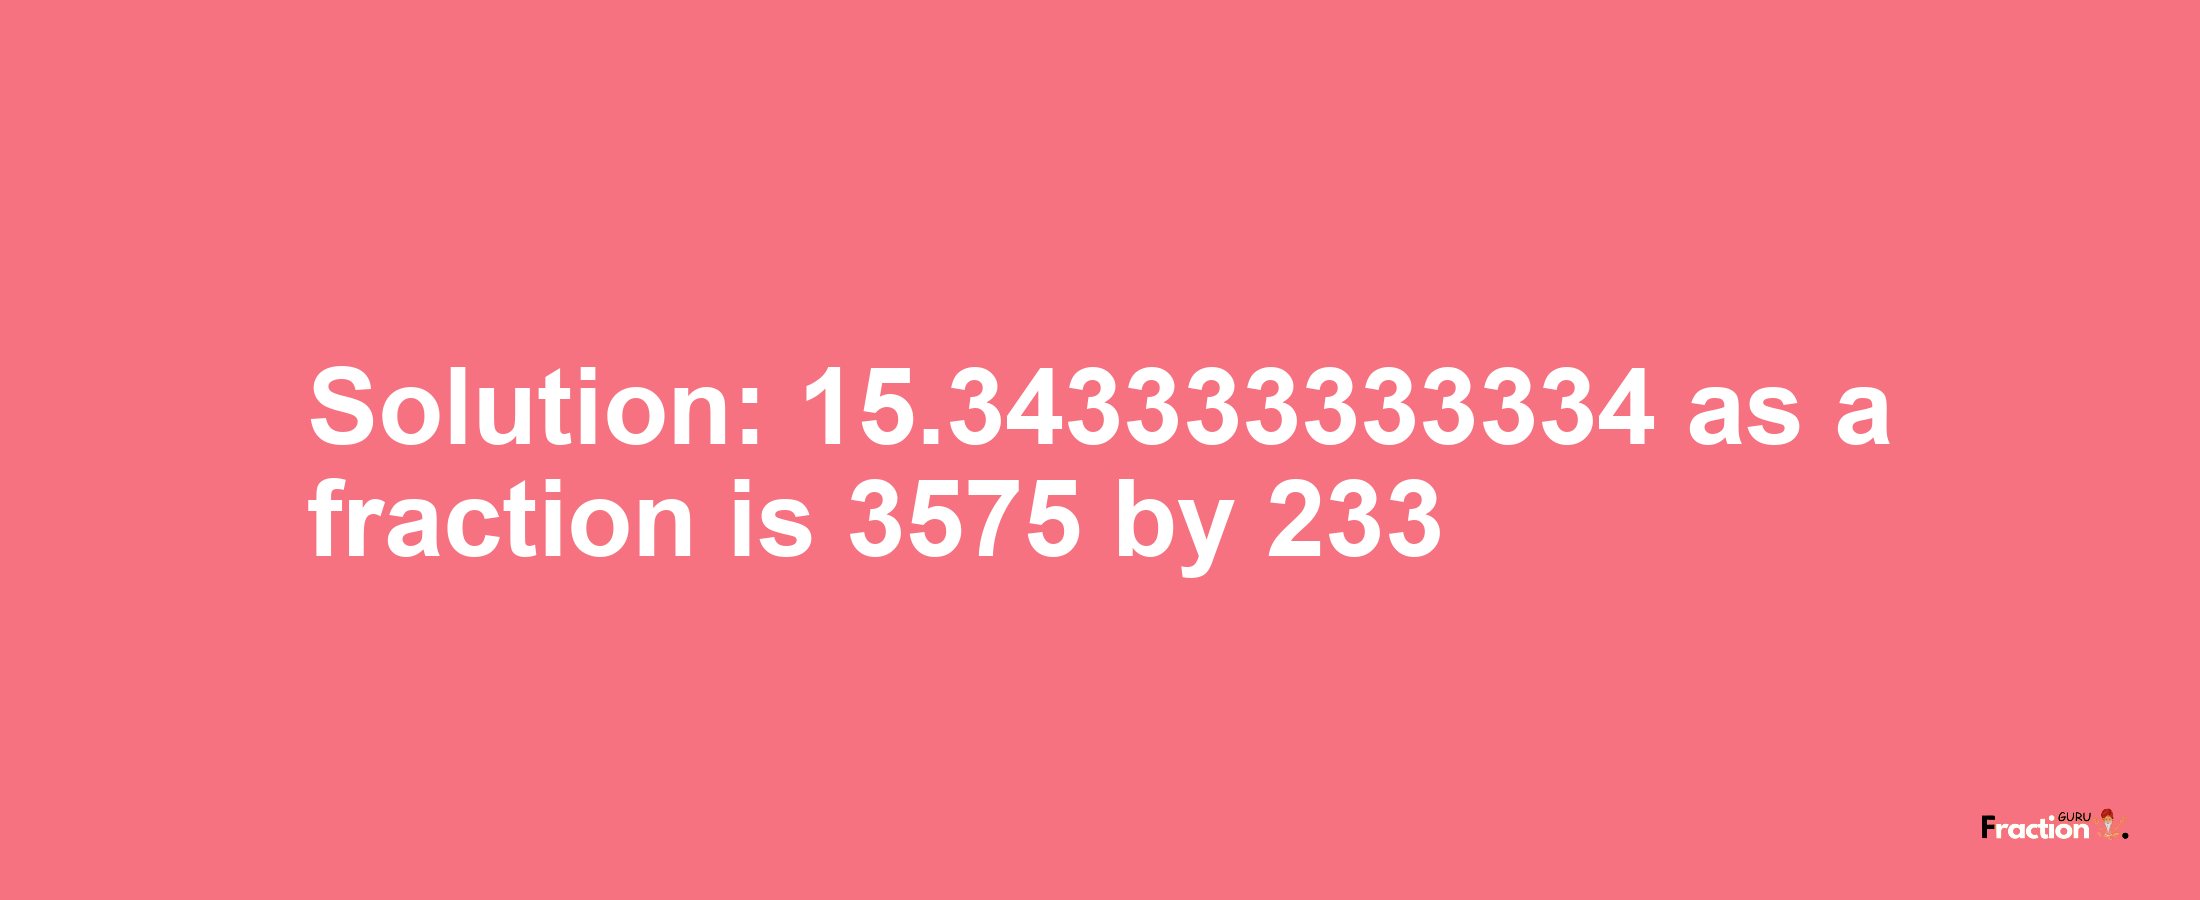 Solution:15.343333333334 as a fraction is 3575/233